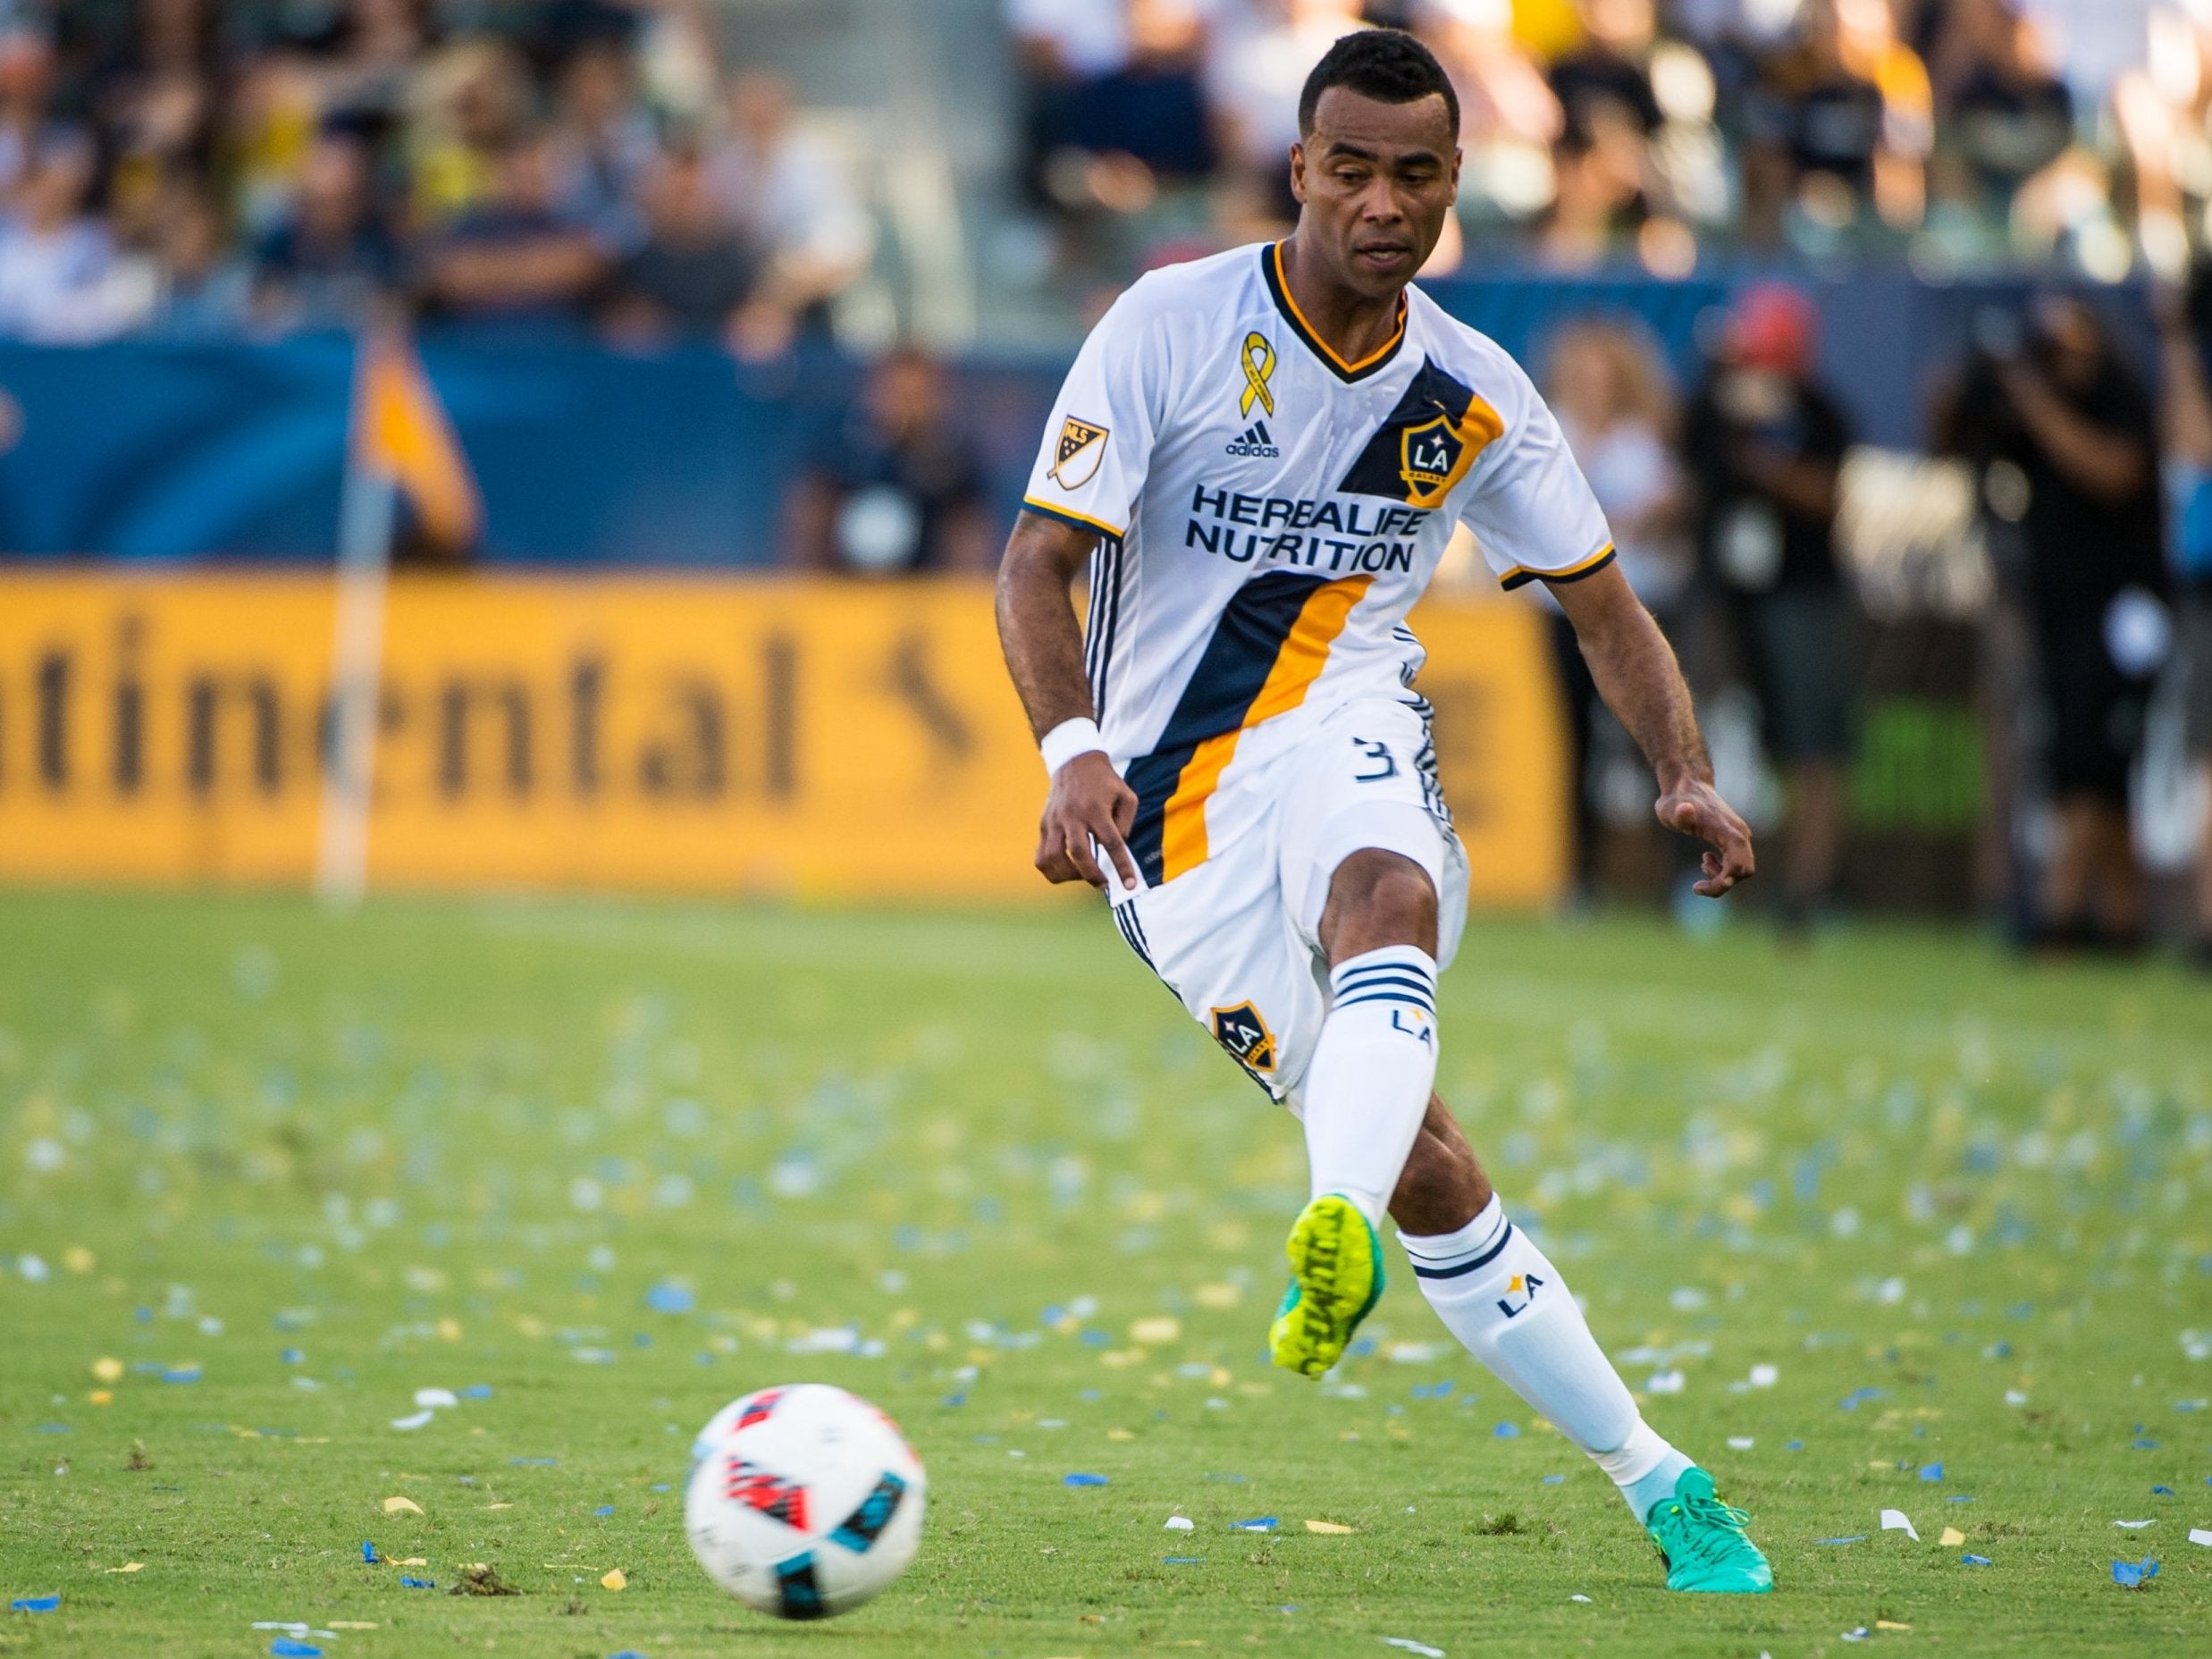 Cole was released by LA Galaxy in November